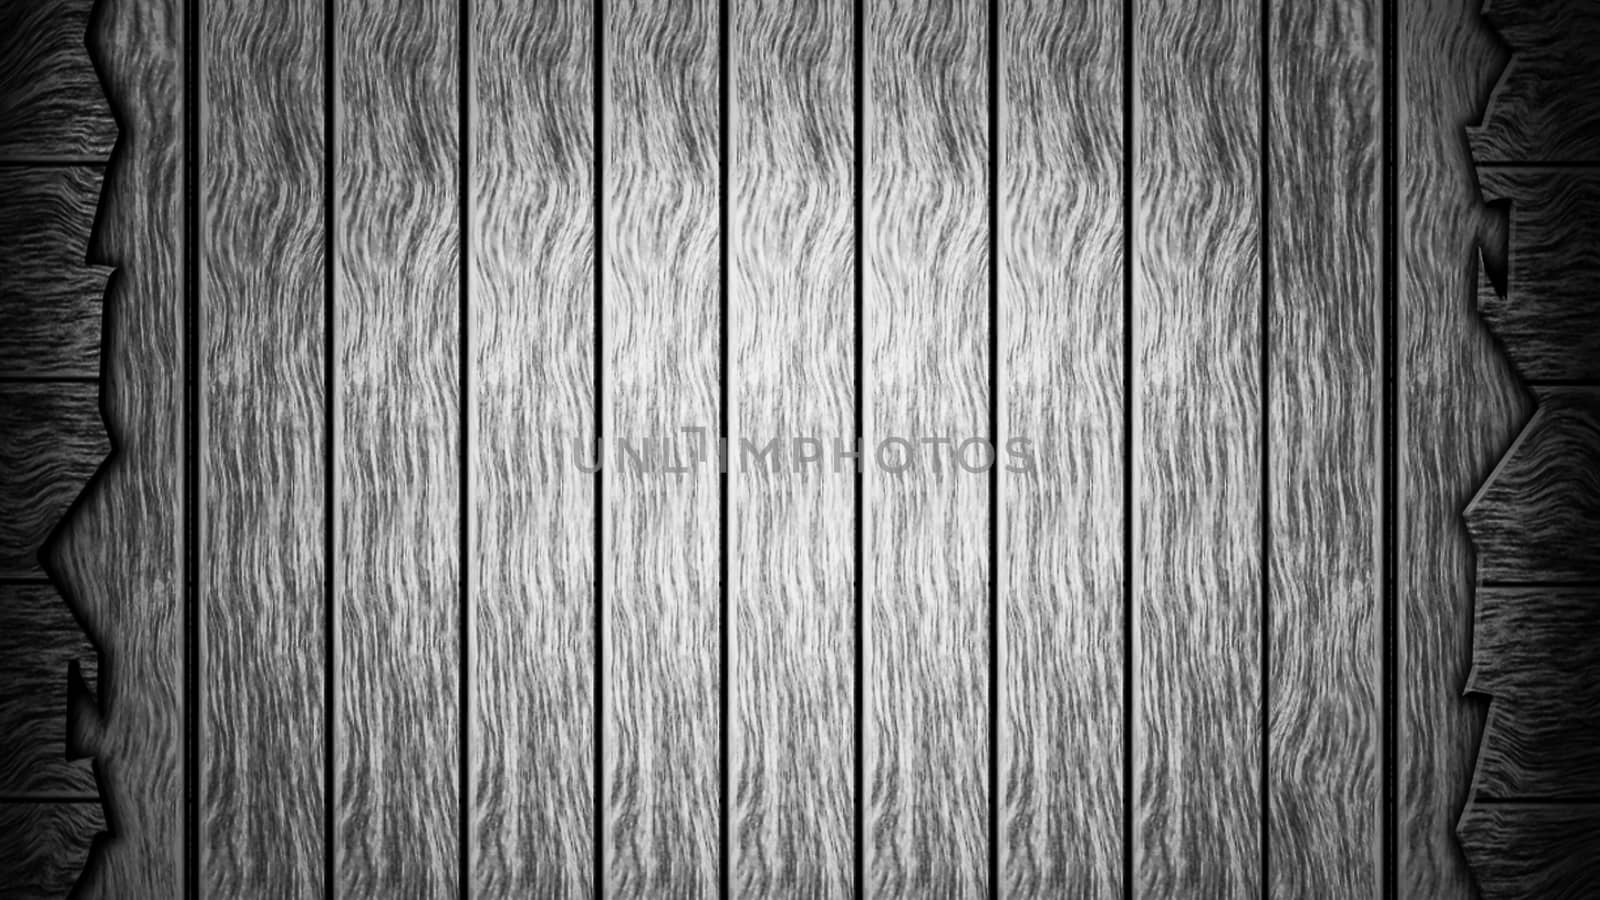 Cracked wood plank background.For art texture or web design and web background.